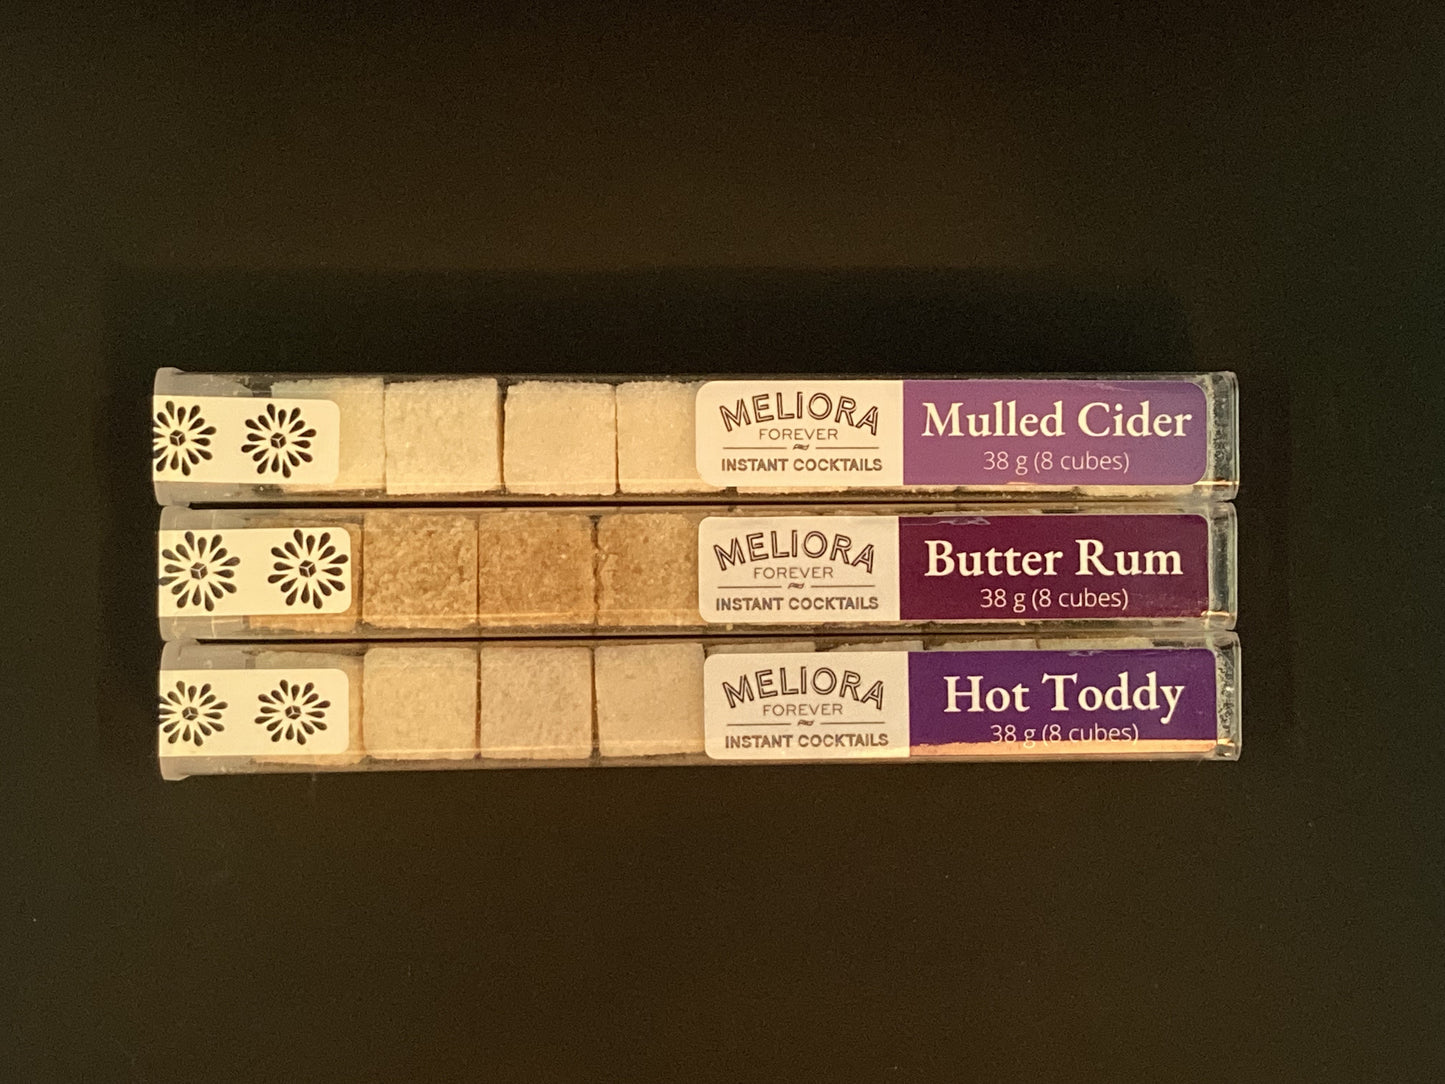 Winter Cocktails Variety Pack